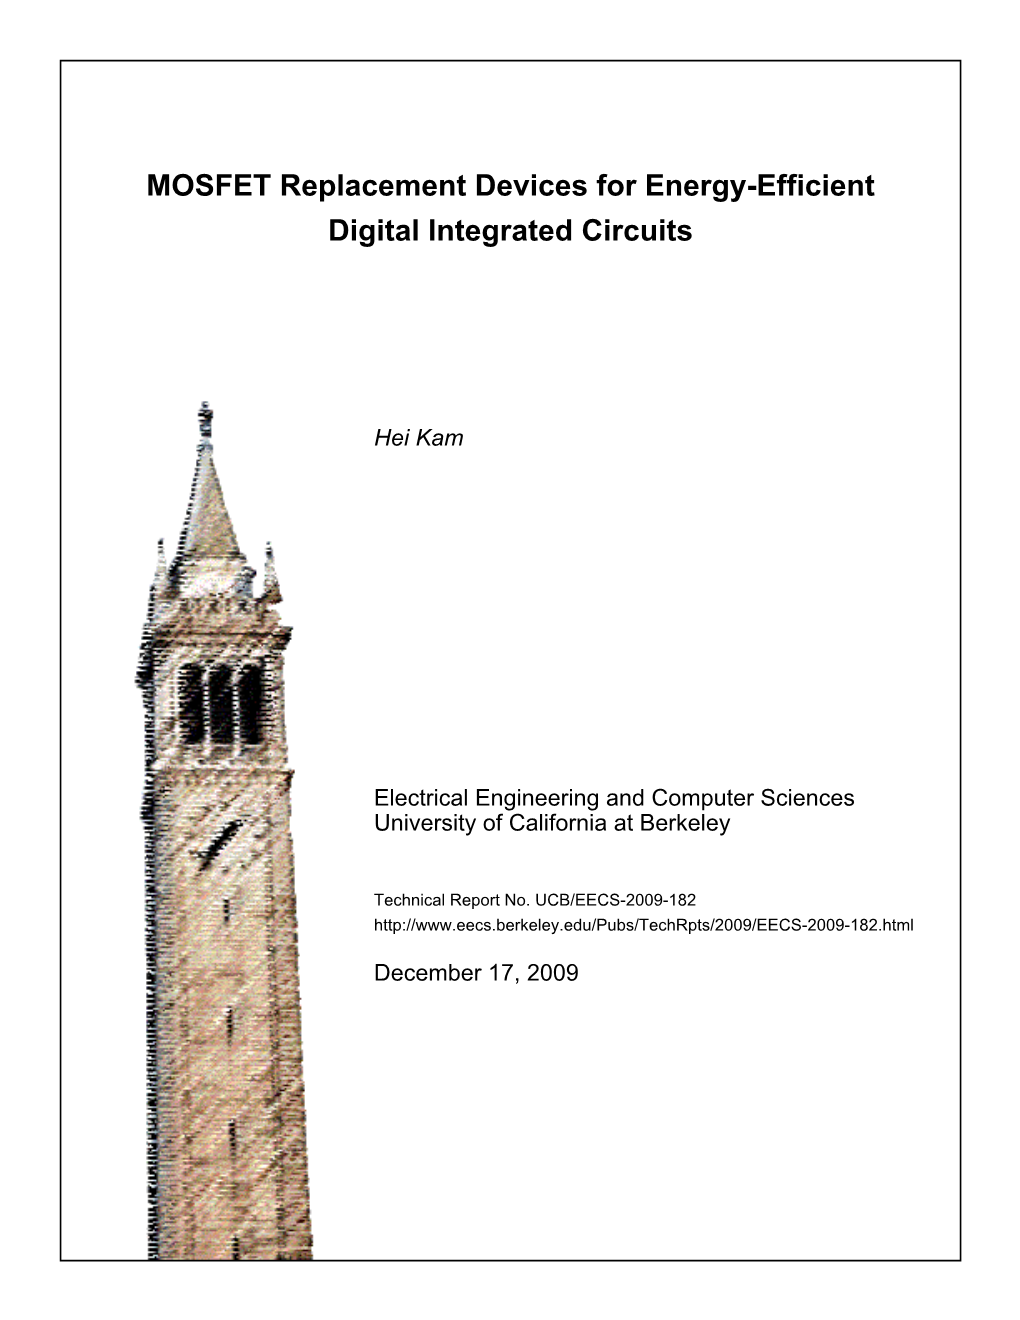 MOSFET Replacement Devices for Energy-Efficient Digital Integrated Circuits